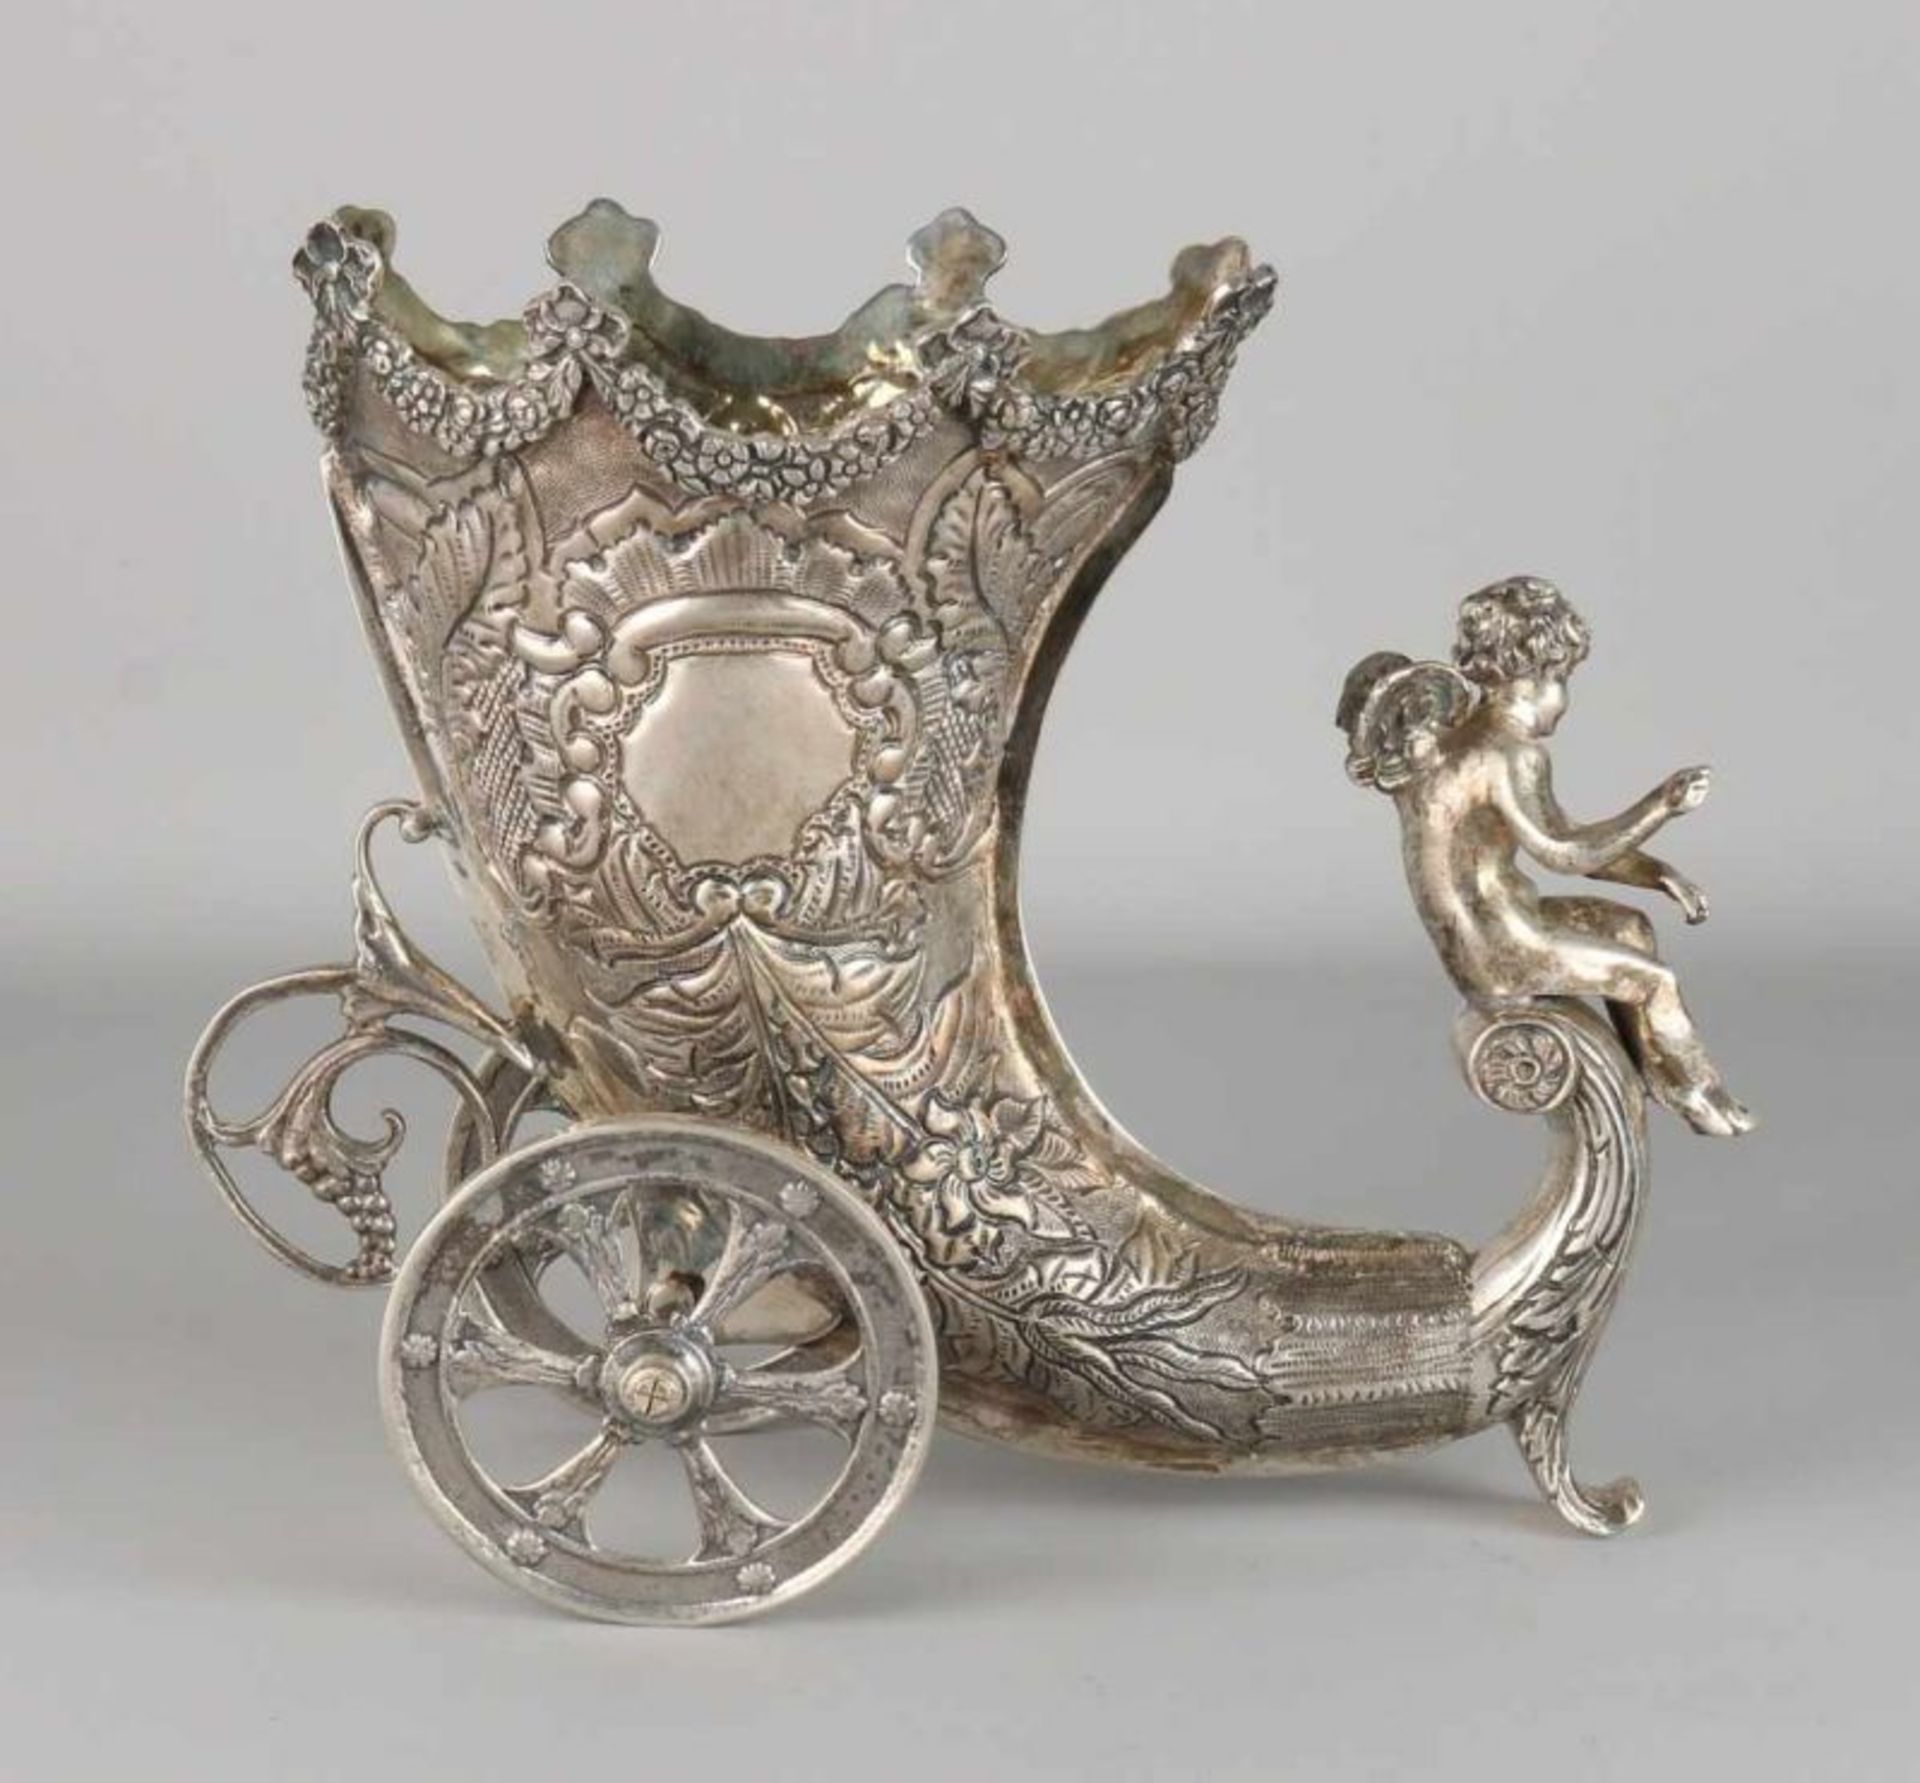 Impressive silver table piece, 925/000, a car in the shape of a cornucopia adorned with floral - Image 2 of 2